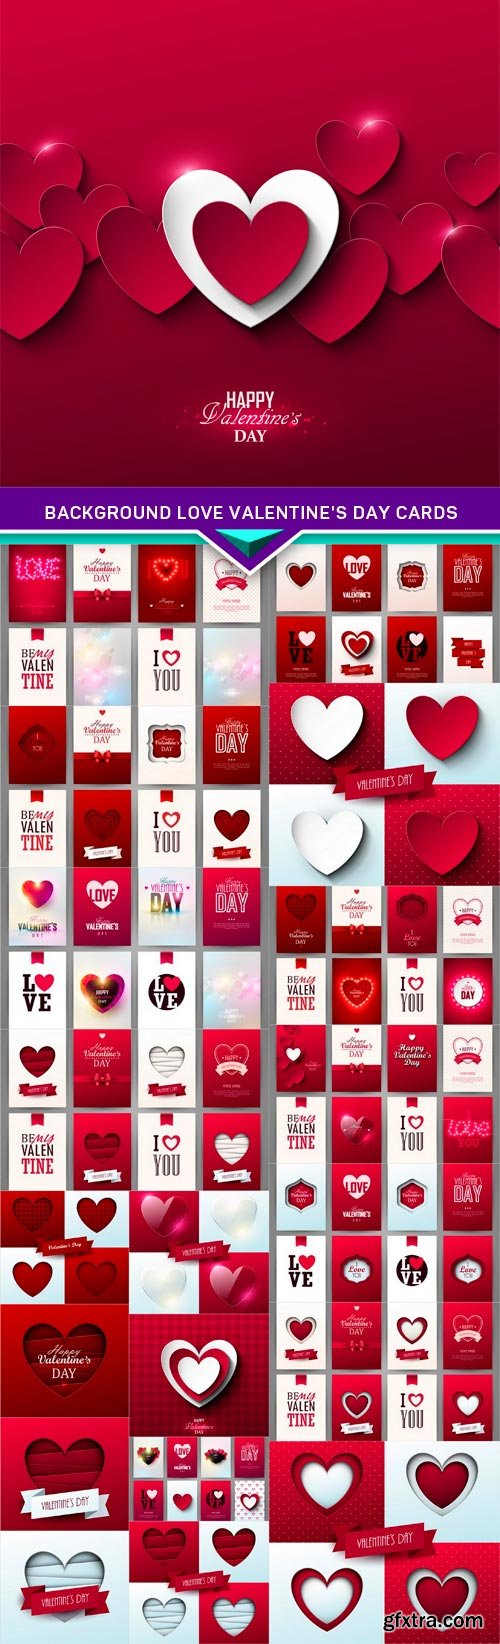 Background Love Valentine\'s Day Cards 20xEPS